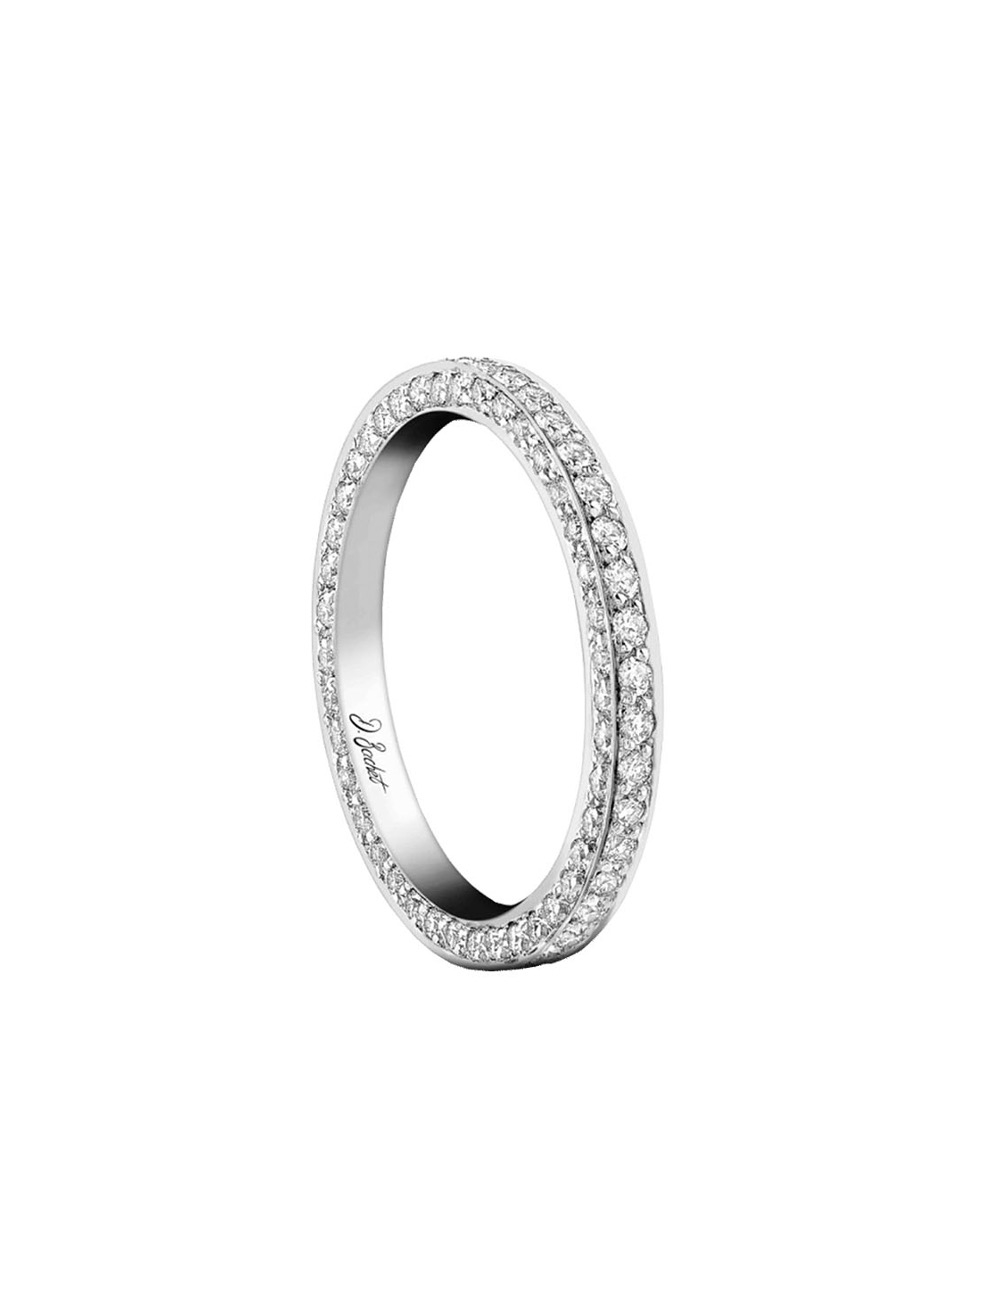 A luxury wedding ring for women in platinum and entirely set with white diamonds.